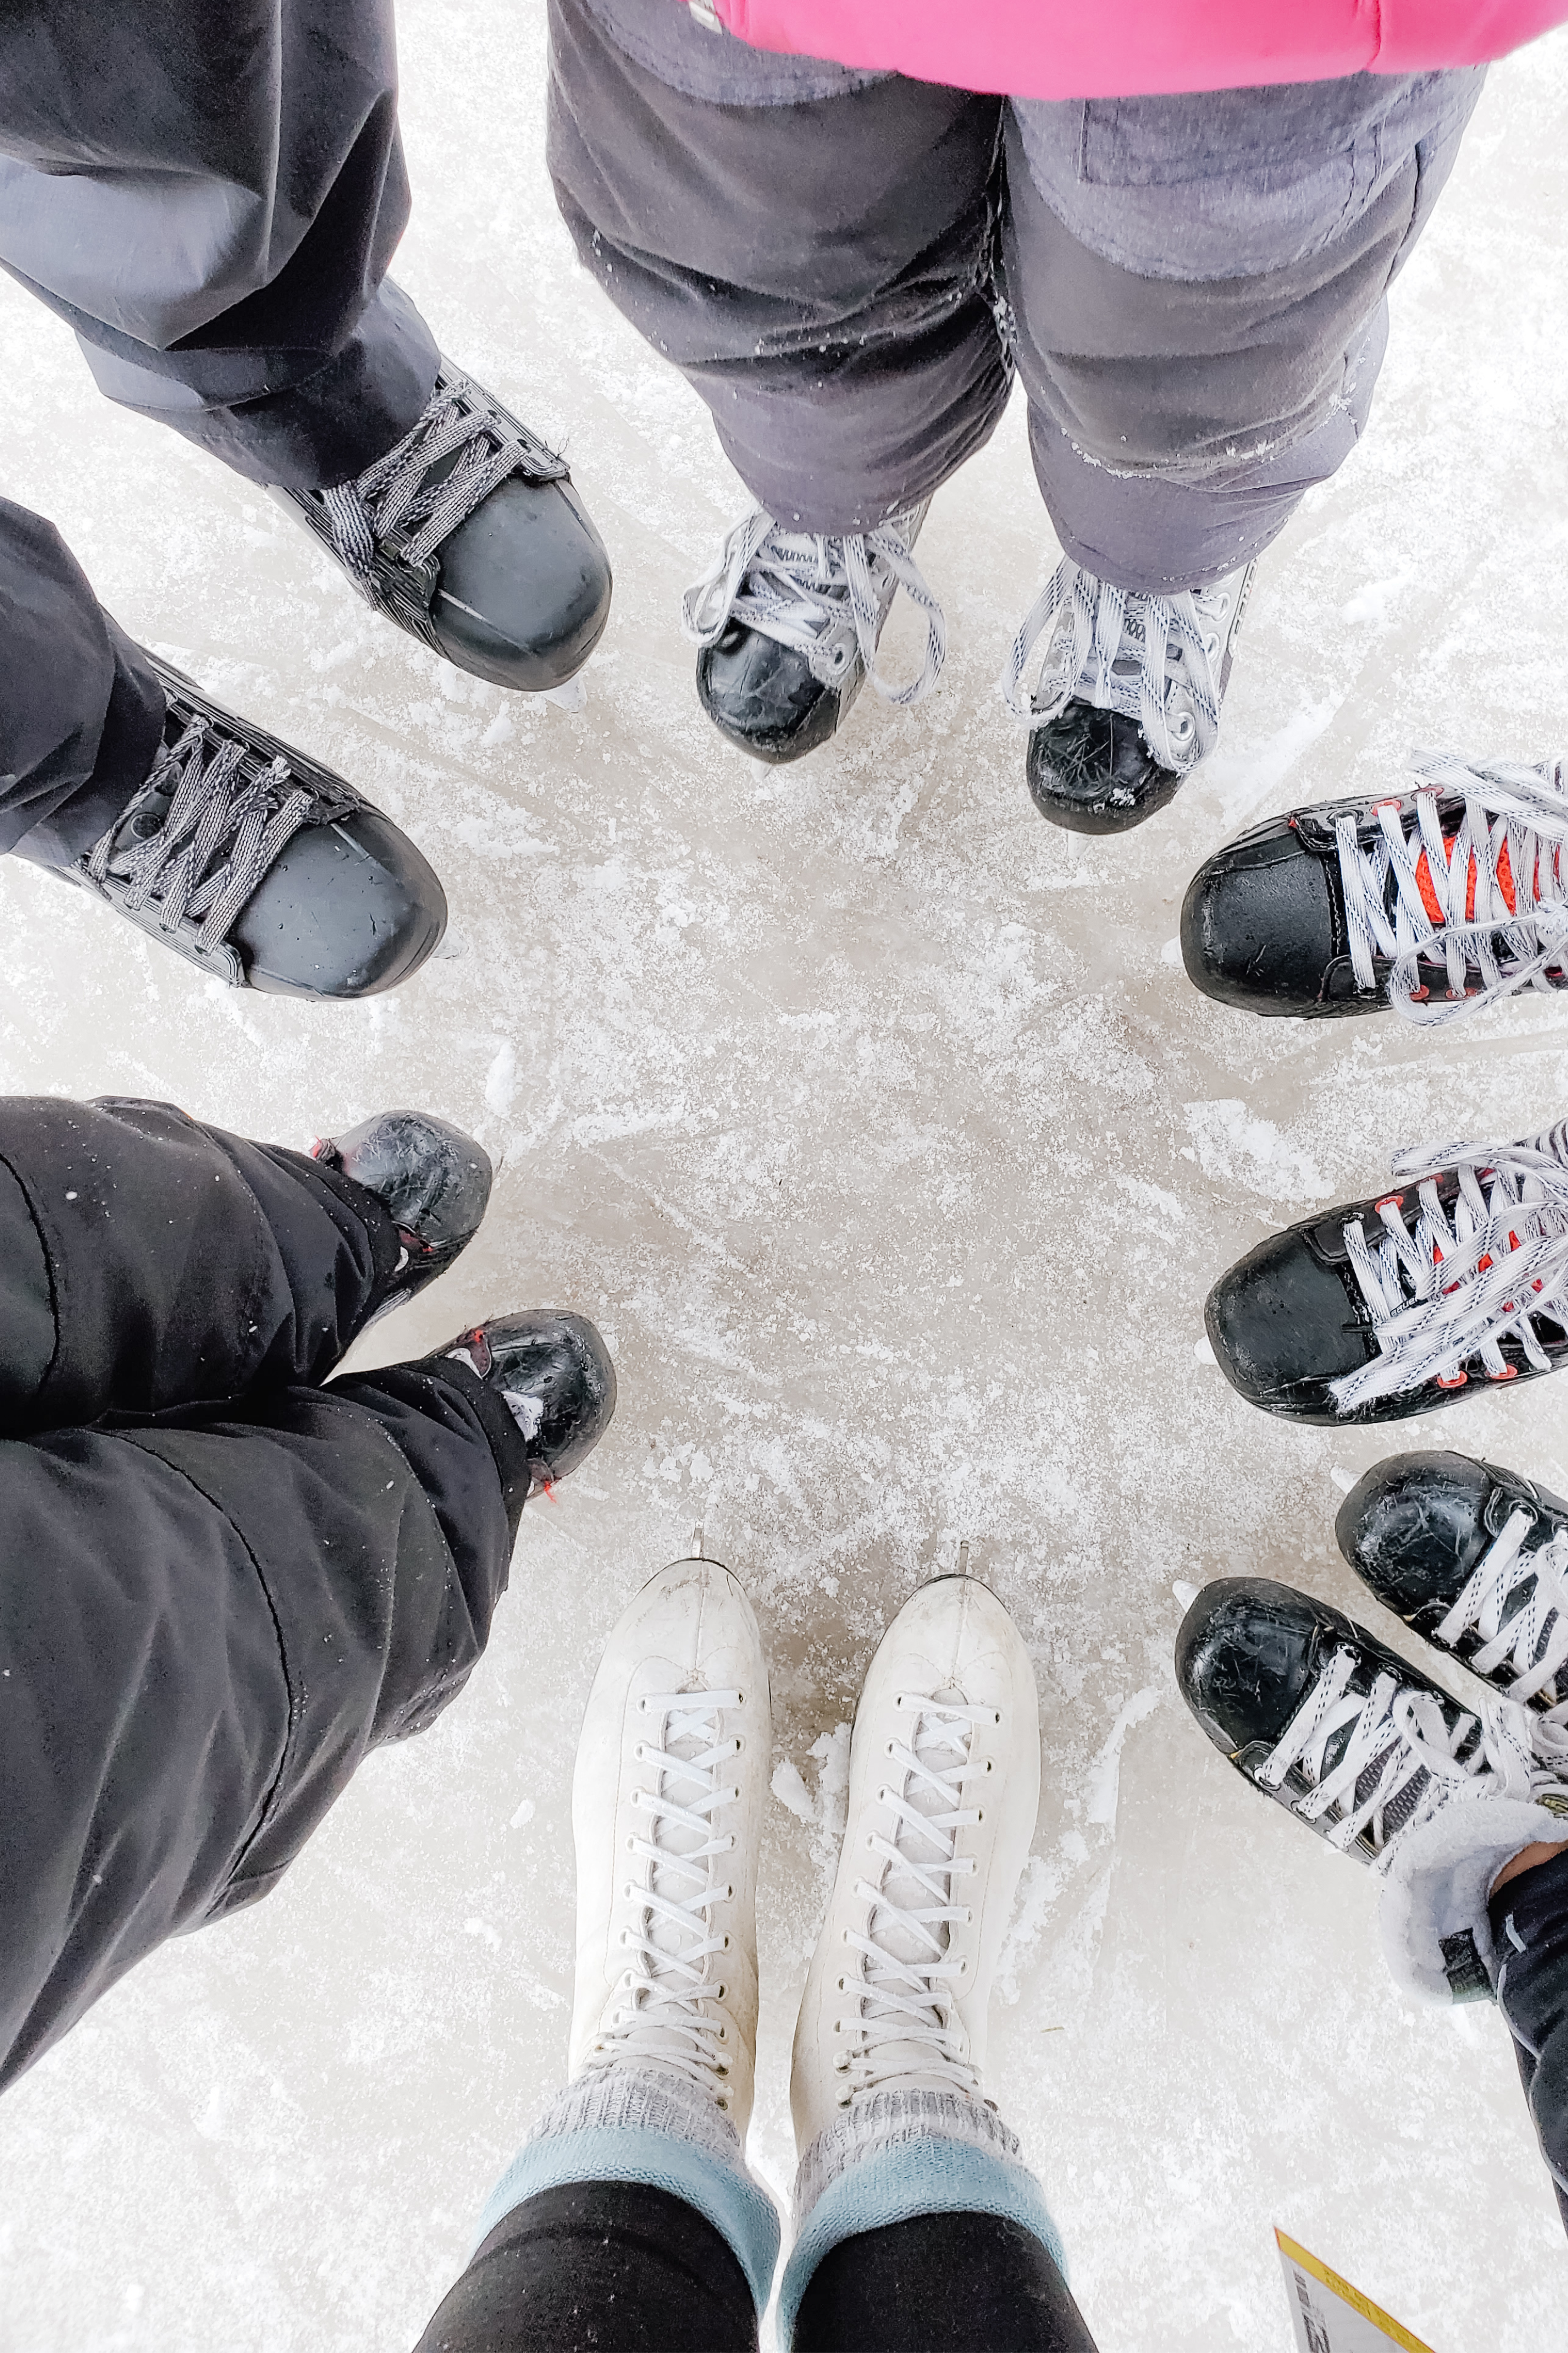 People gathered in a circle with a view of their skates. 